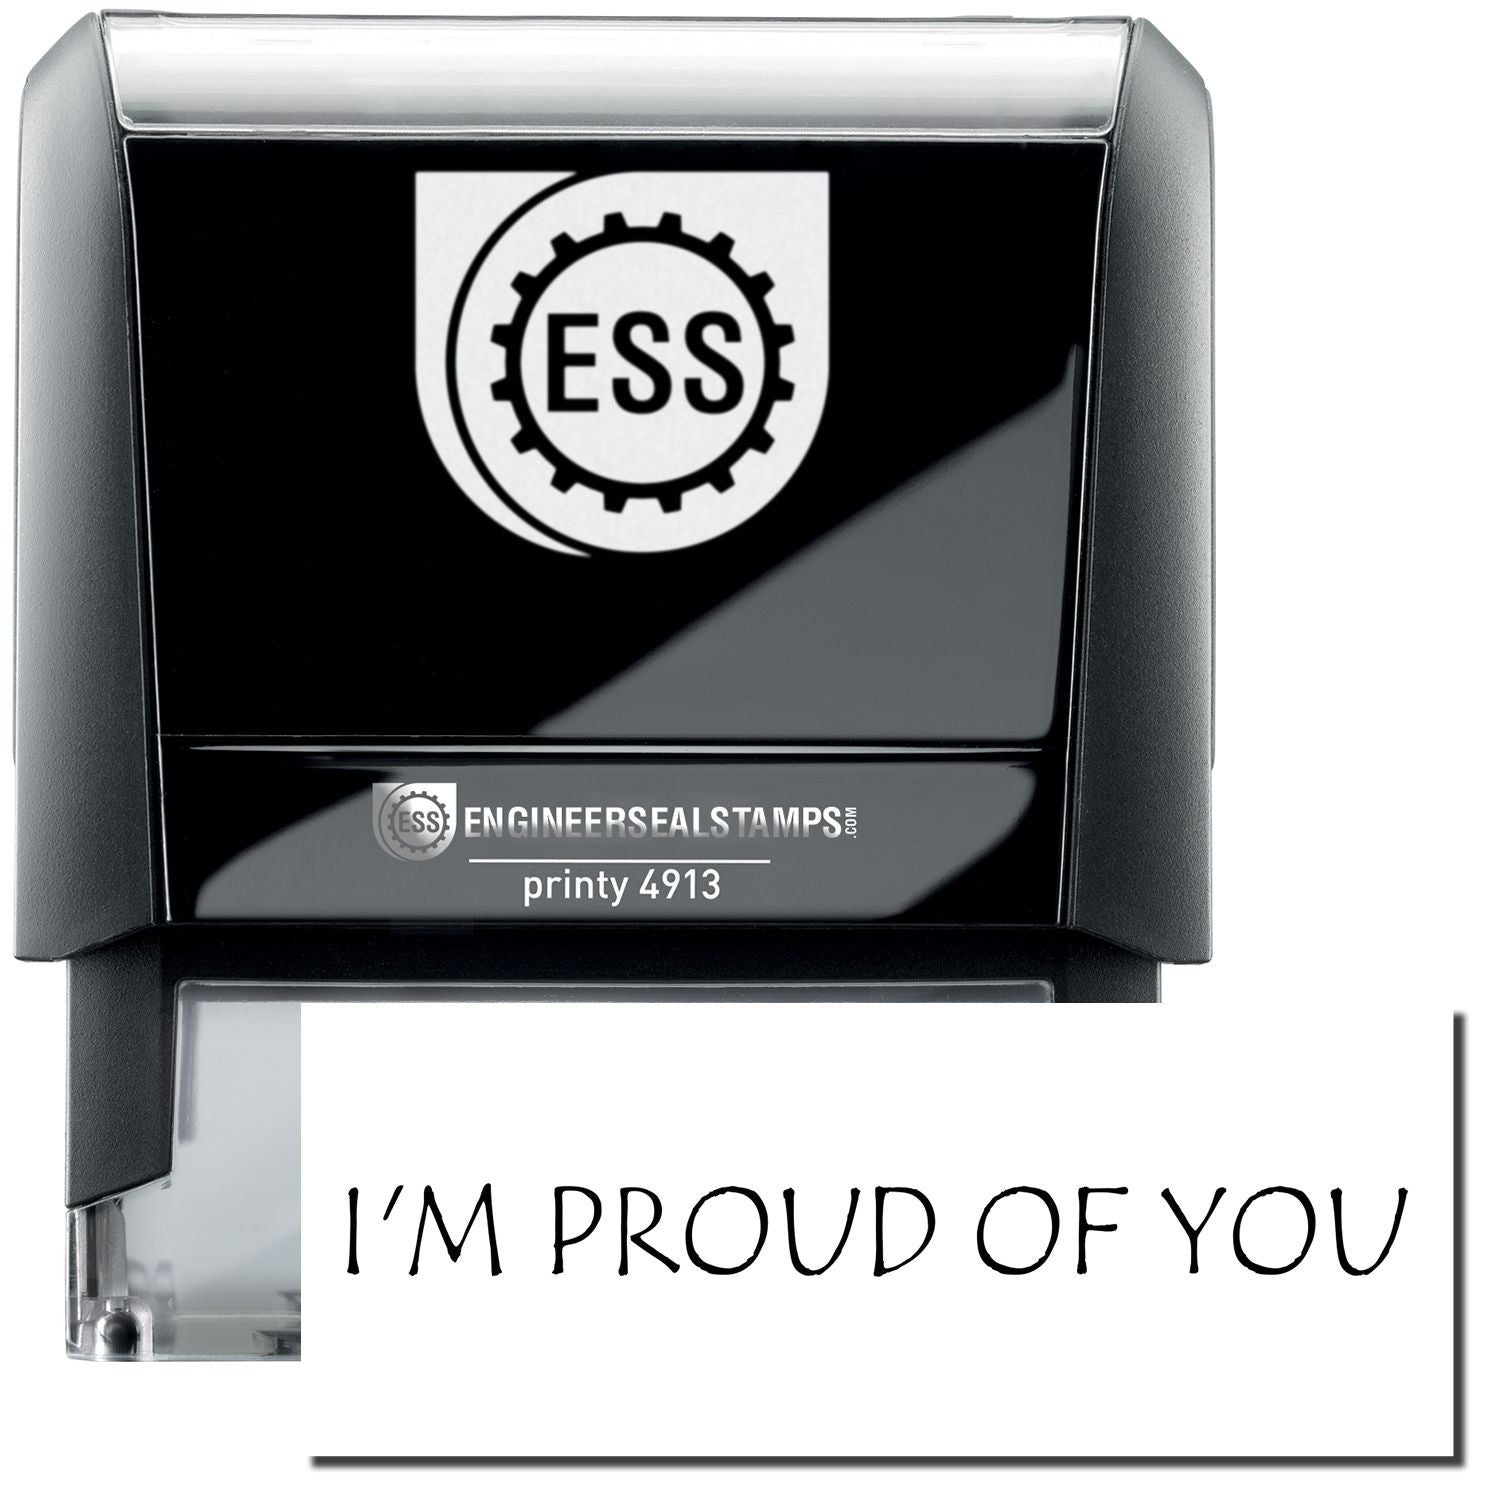 A self-inking stamp with a stamped image showing how the text "I'M PROUD OF YOU" in a large font is displayed by it.